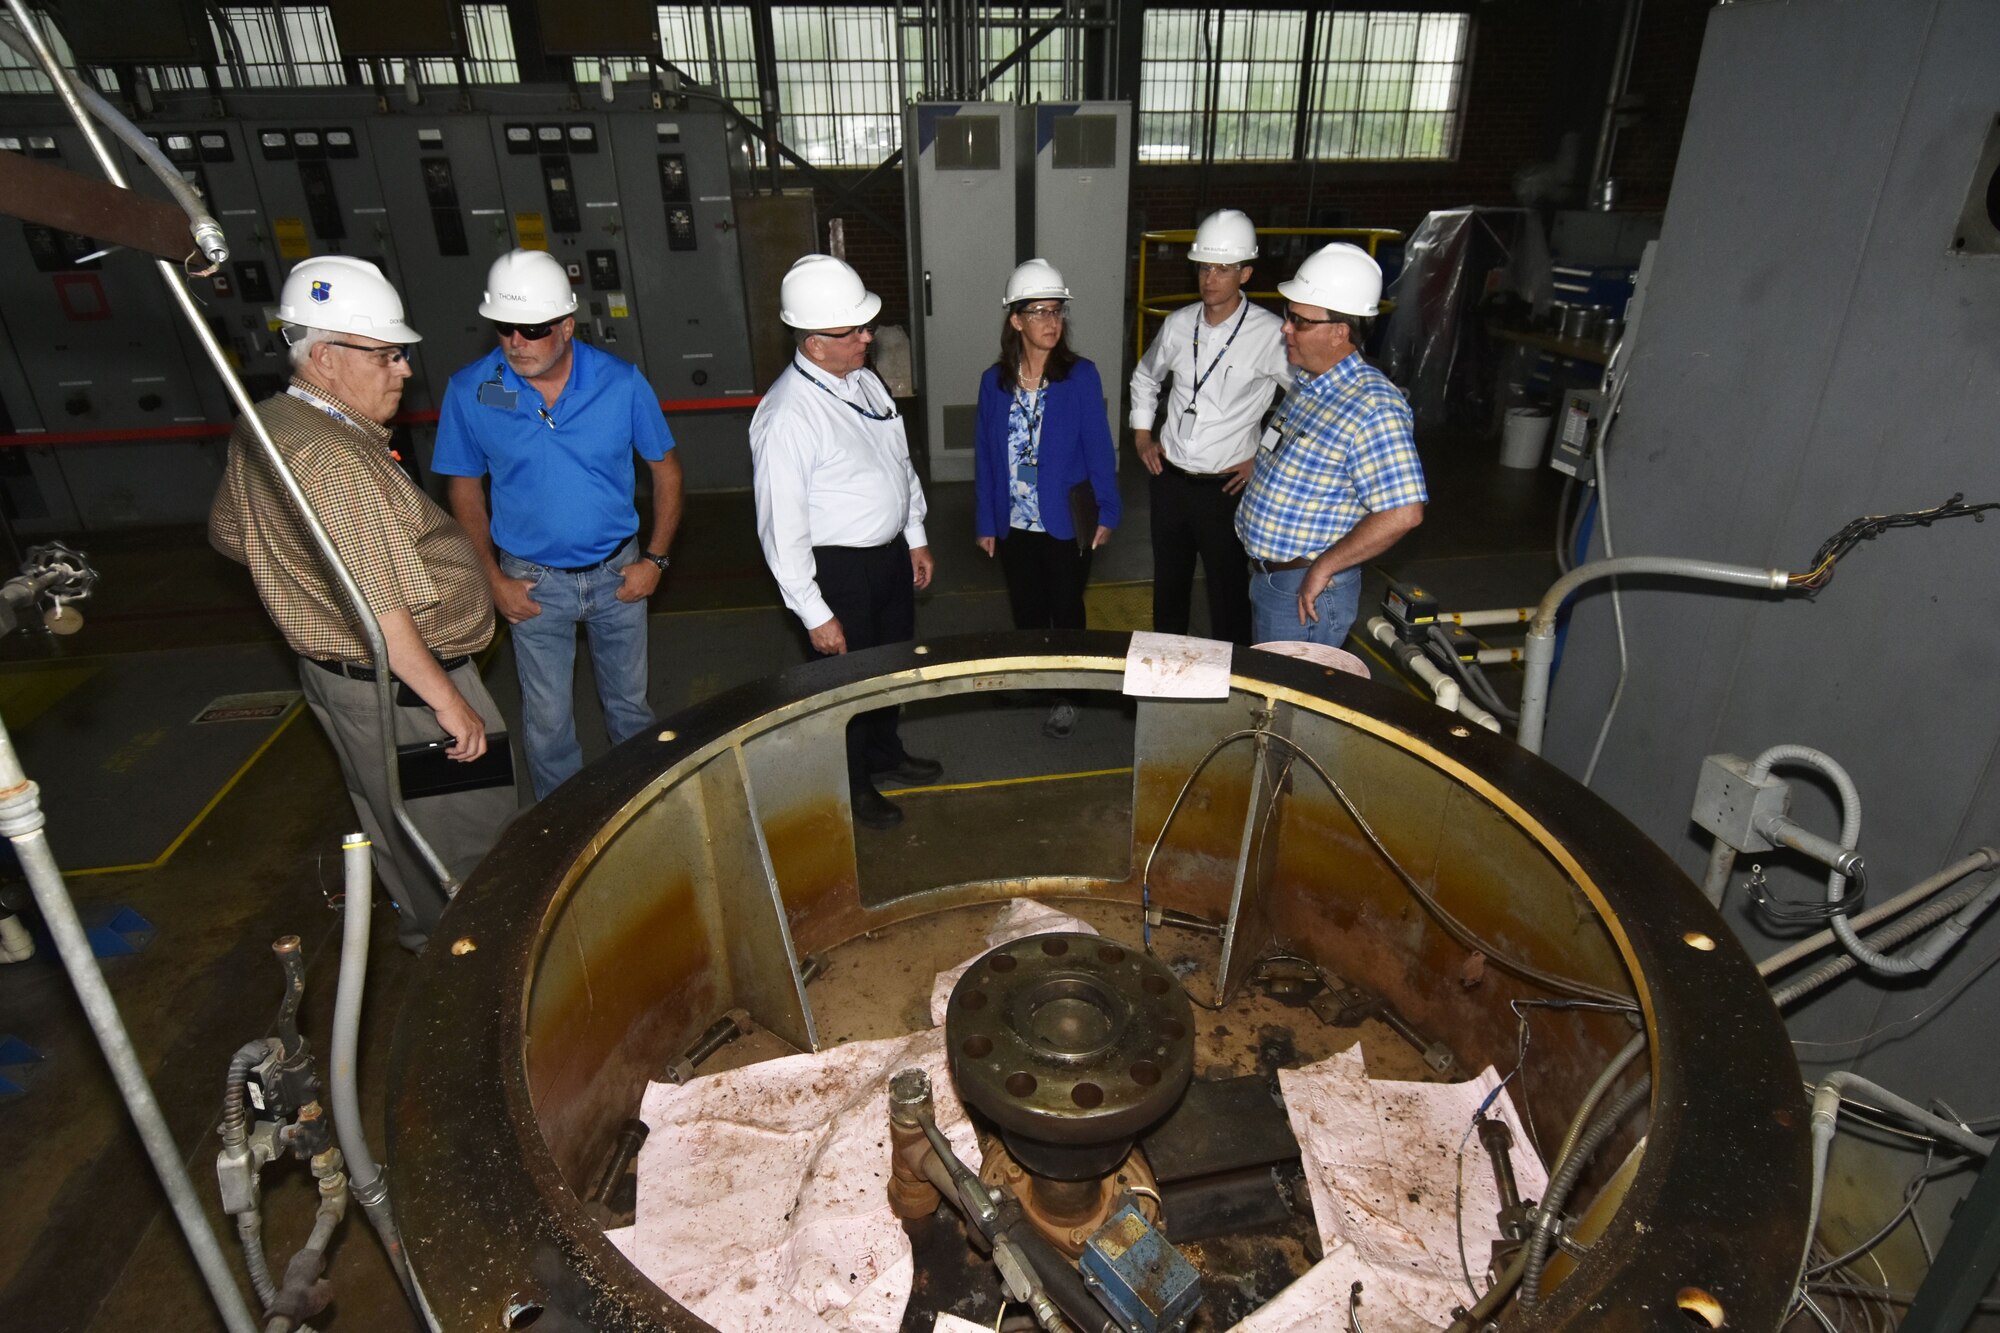 A Safety Walk-thru is underway at the Arnold Air Force Base Primary Pumping Station. Pictured from left are: NAS Safety, Health & Environmental Manager Dick Nugent; NAS Supervisor Bob Thomas; NAS Deputy General Manager Doug Pearson; NAS General Manager Cynthia Rivera; NAS Integrated Resources Director Ben Souther; and NAS Cooling Water System Engineer Jeff Quattlebaum. (U.S. Air Force photo/Rick Goodfriend)